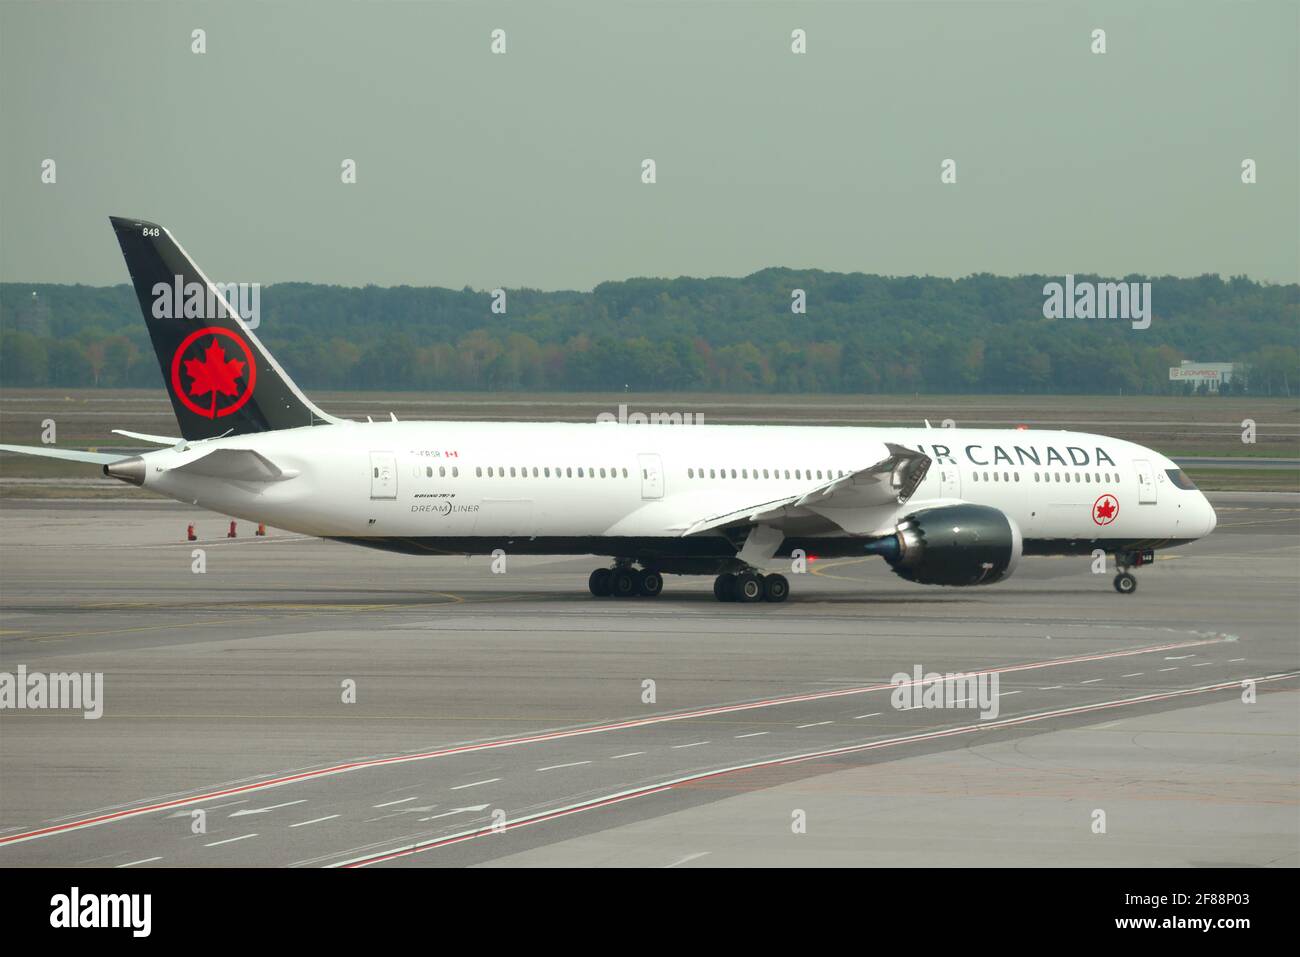 MILAN, ITALY-SEPTEMBER 18, 2017: Aircraft Boeing 787-9 Dreamliner (C-FRSR) of Air Canada before departure from Malpensa Airport Stock Photo